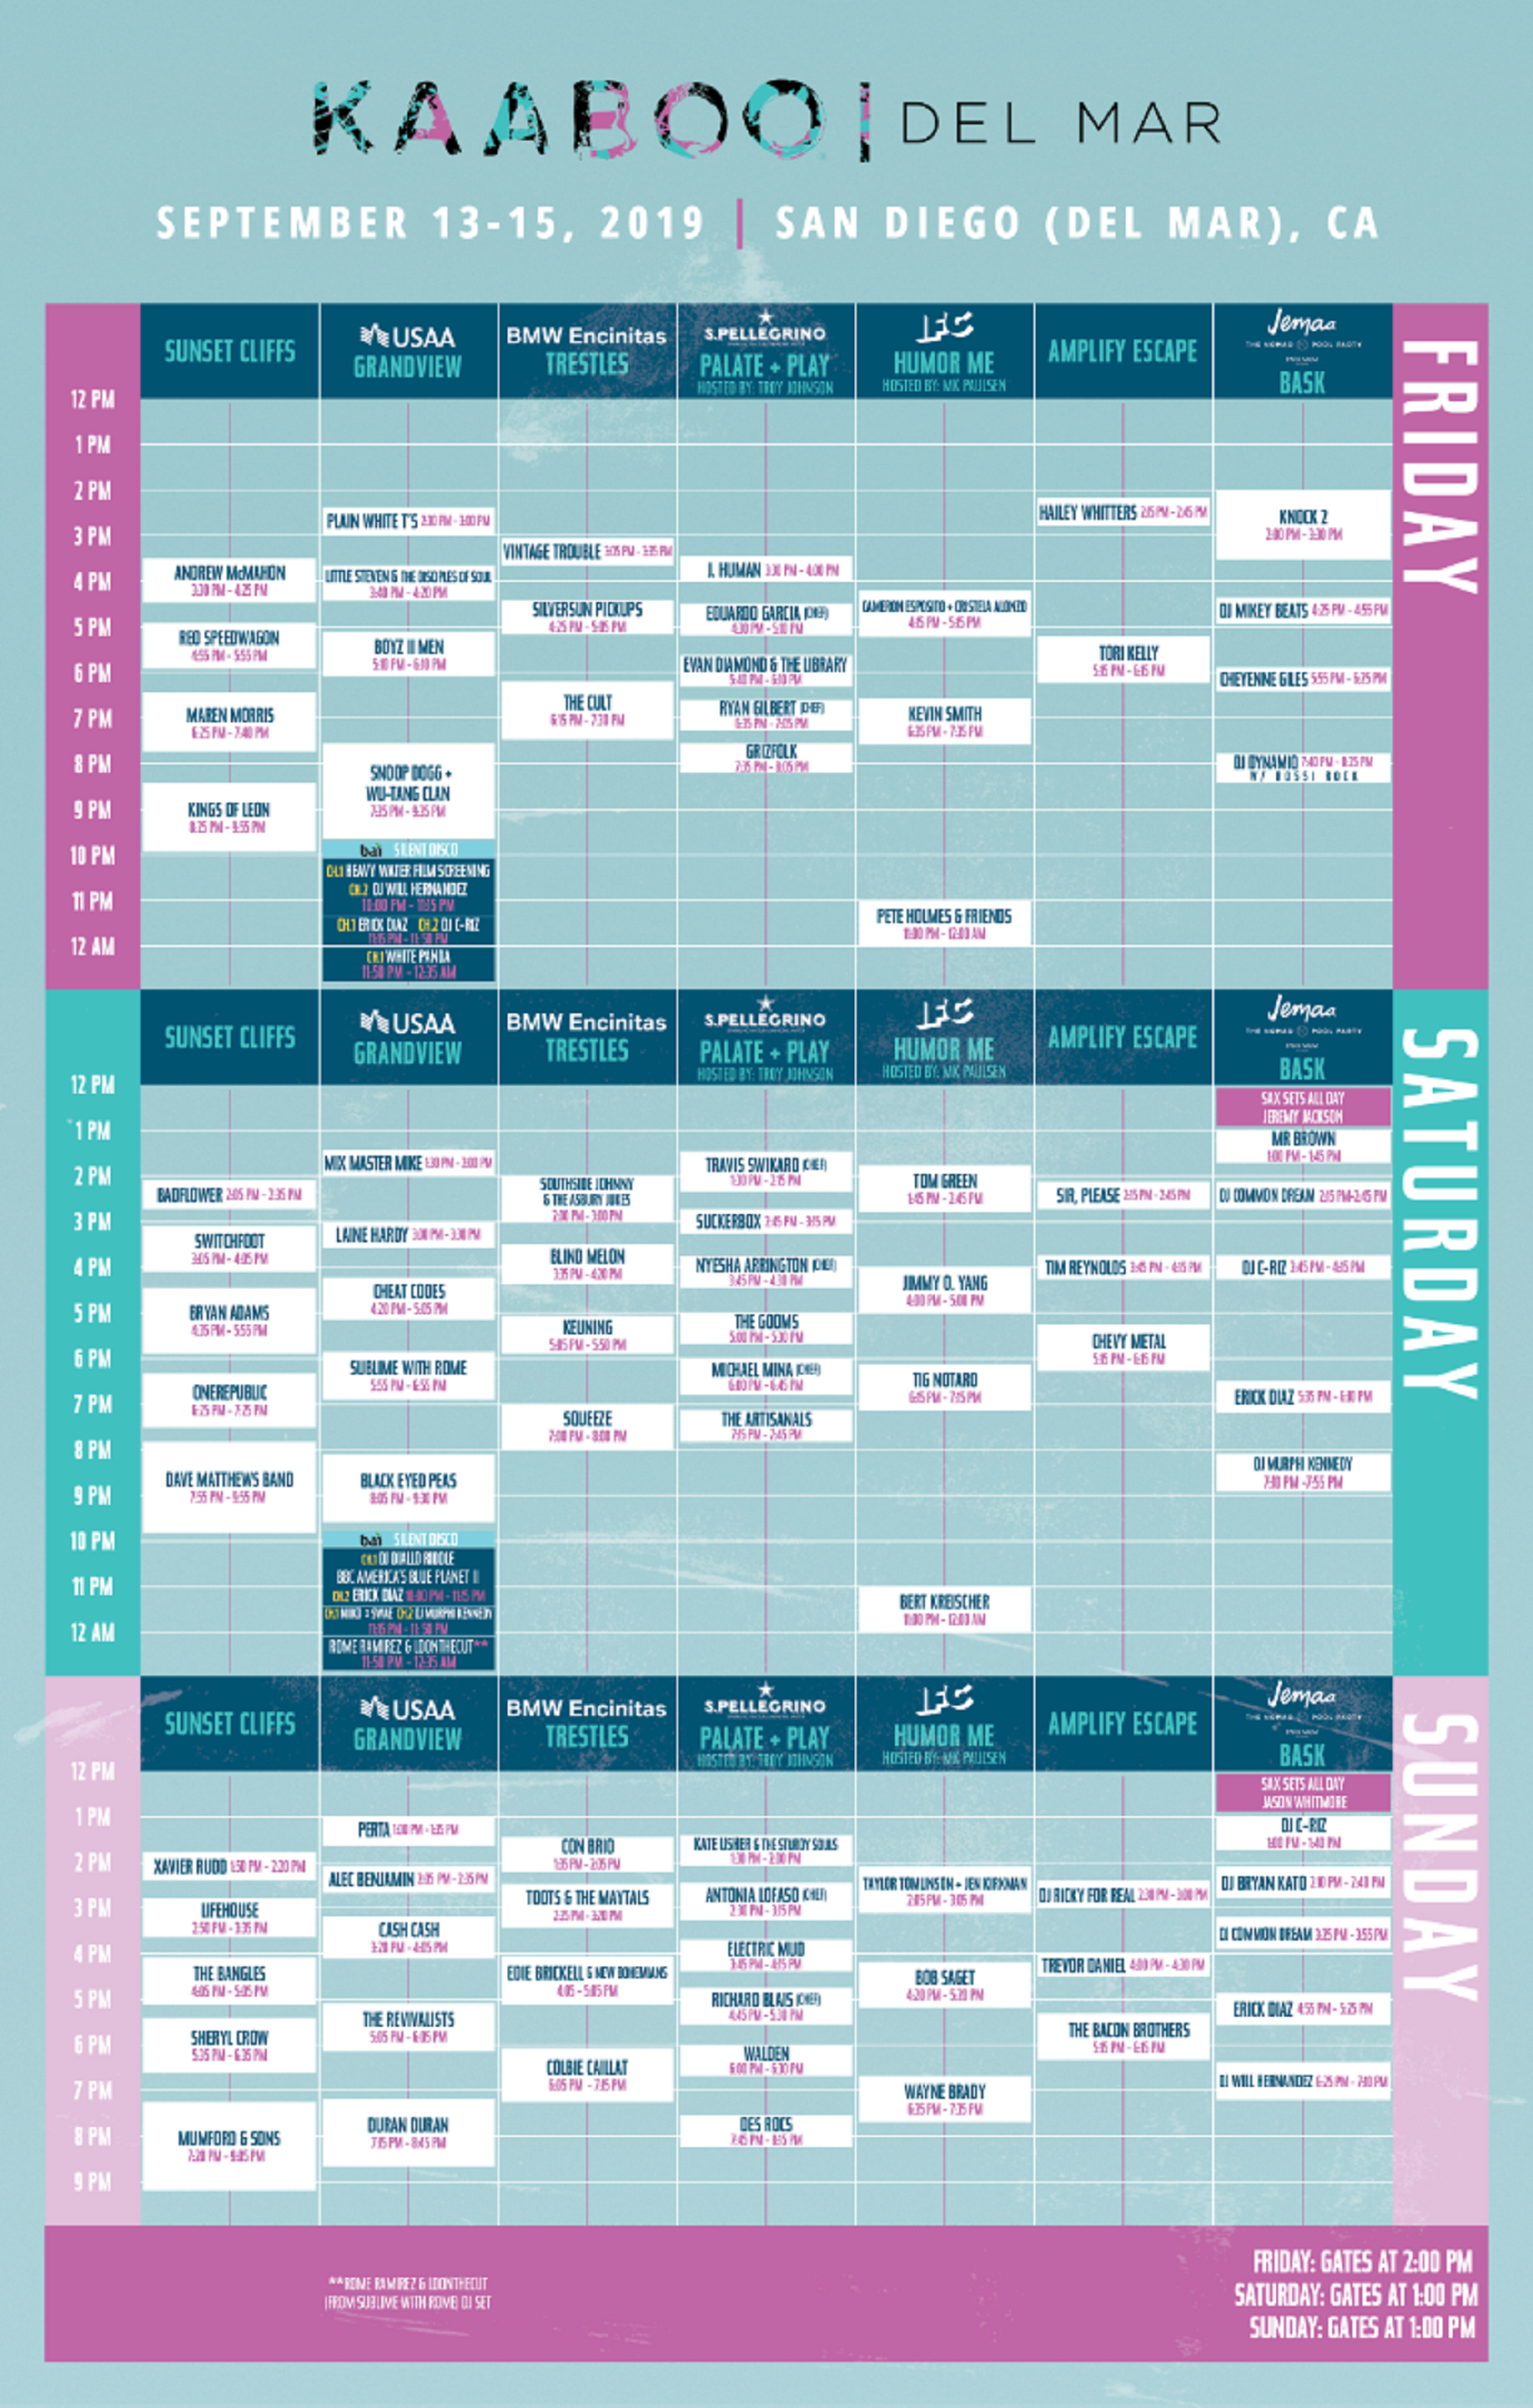 KAABOO Del Mar 2019 Daily Schedule Announced | Grateful Web